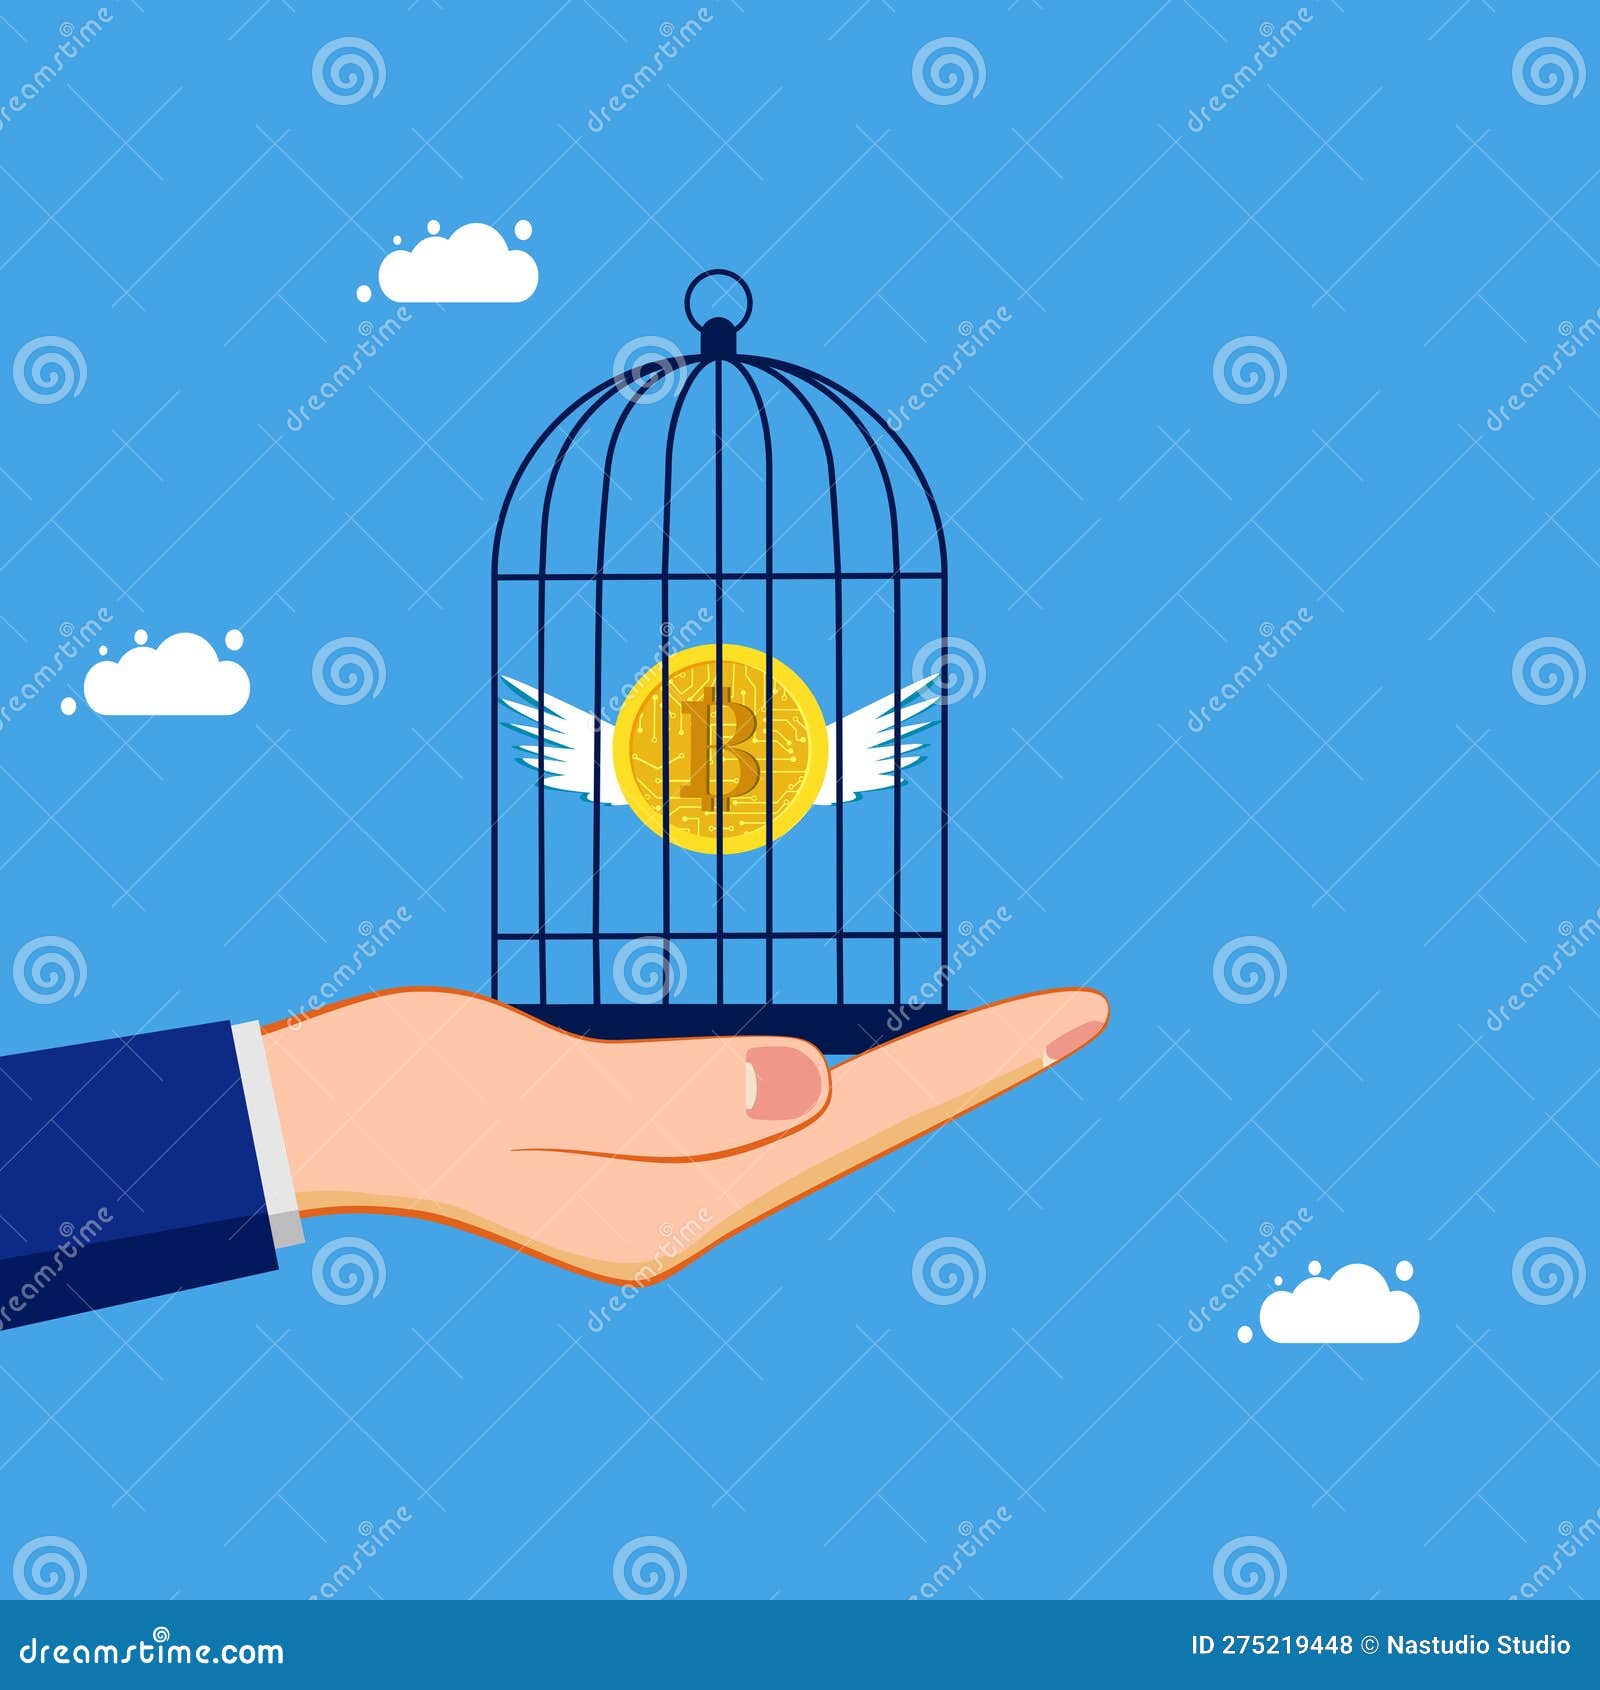 cryptocurrency control. confine or lock digital coins in a birdcage. concept of finance and investment